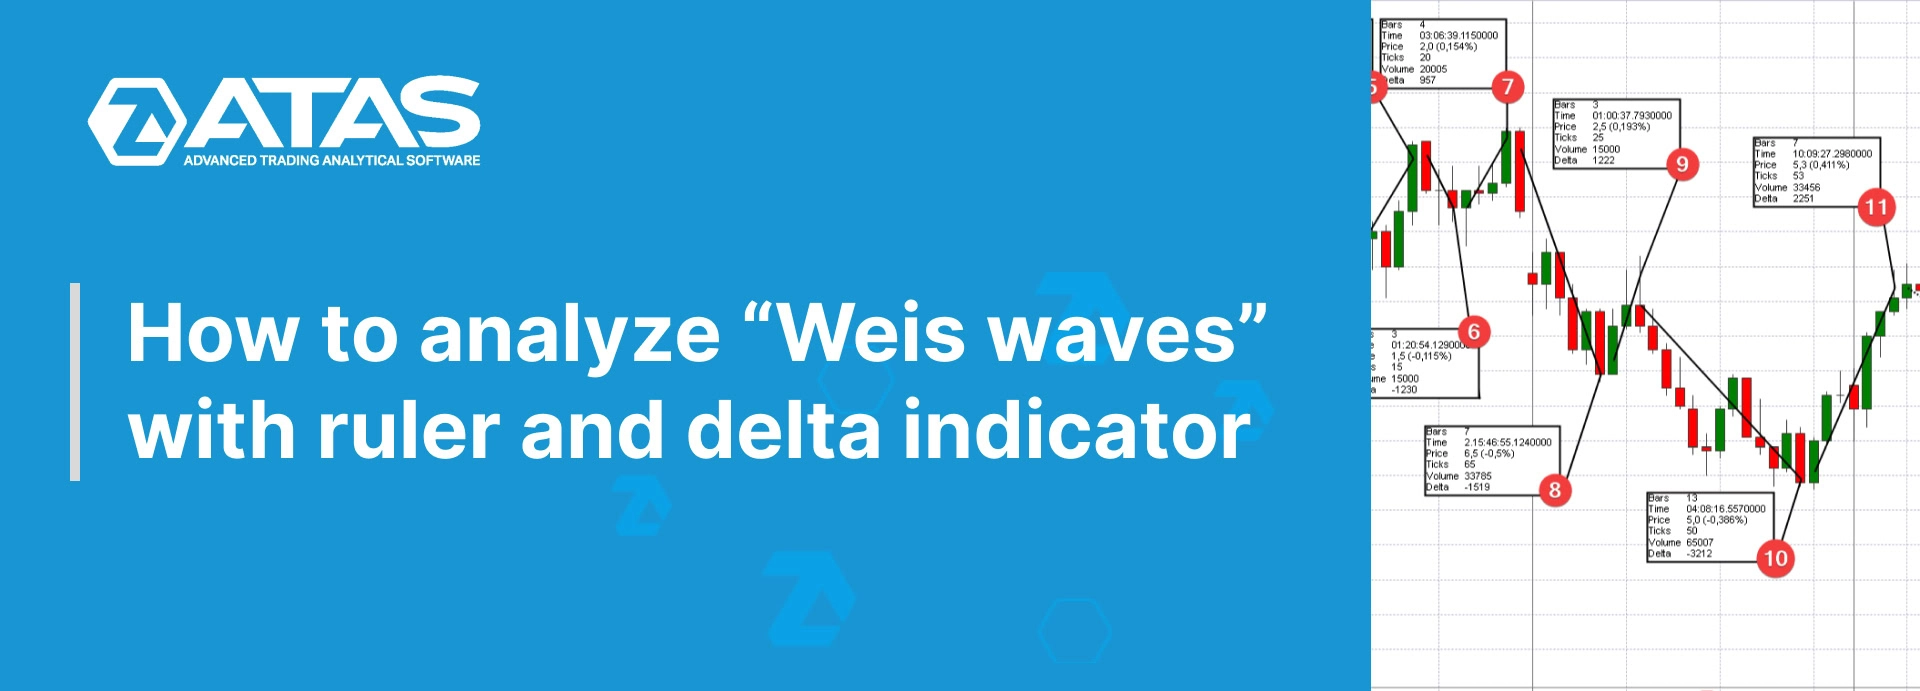 How to analyze “Weis waves” with ruler and delta indicator